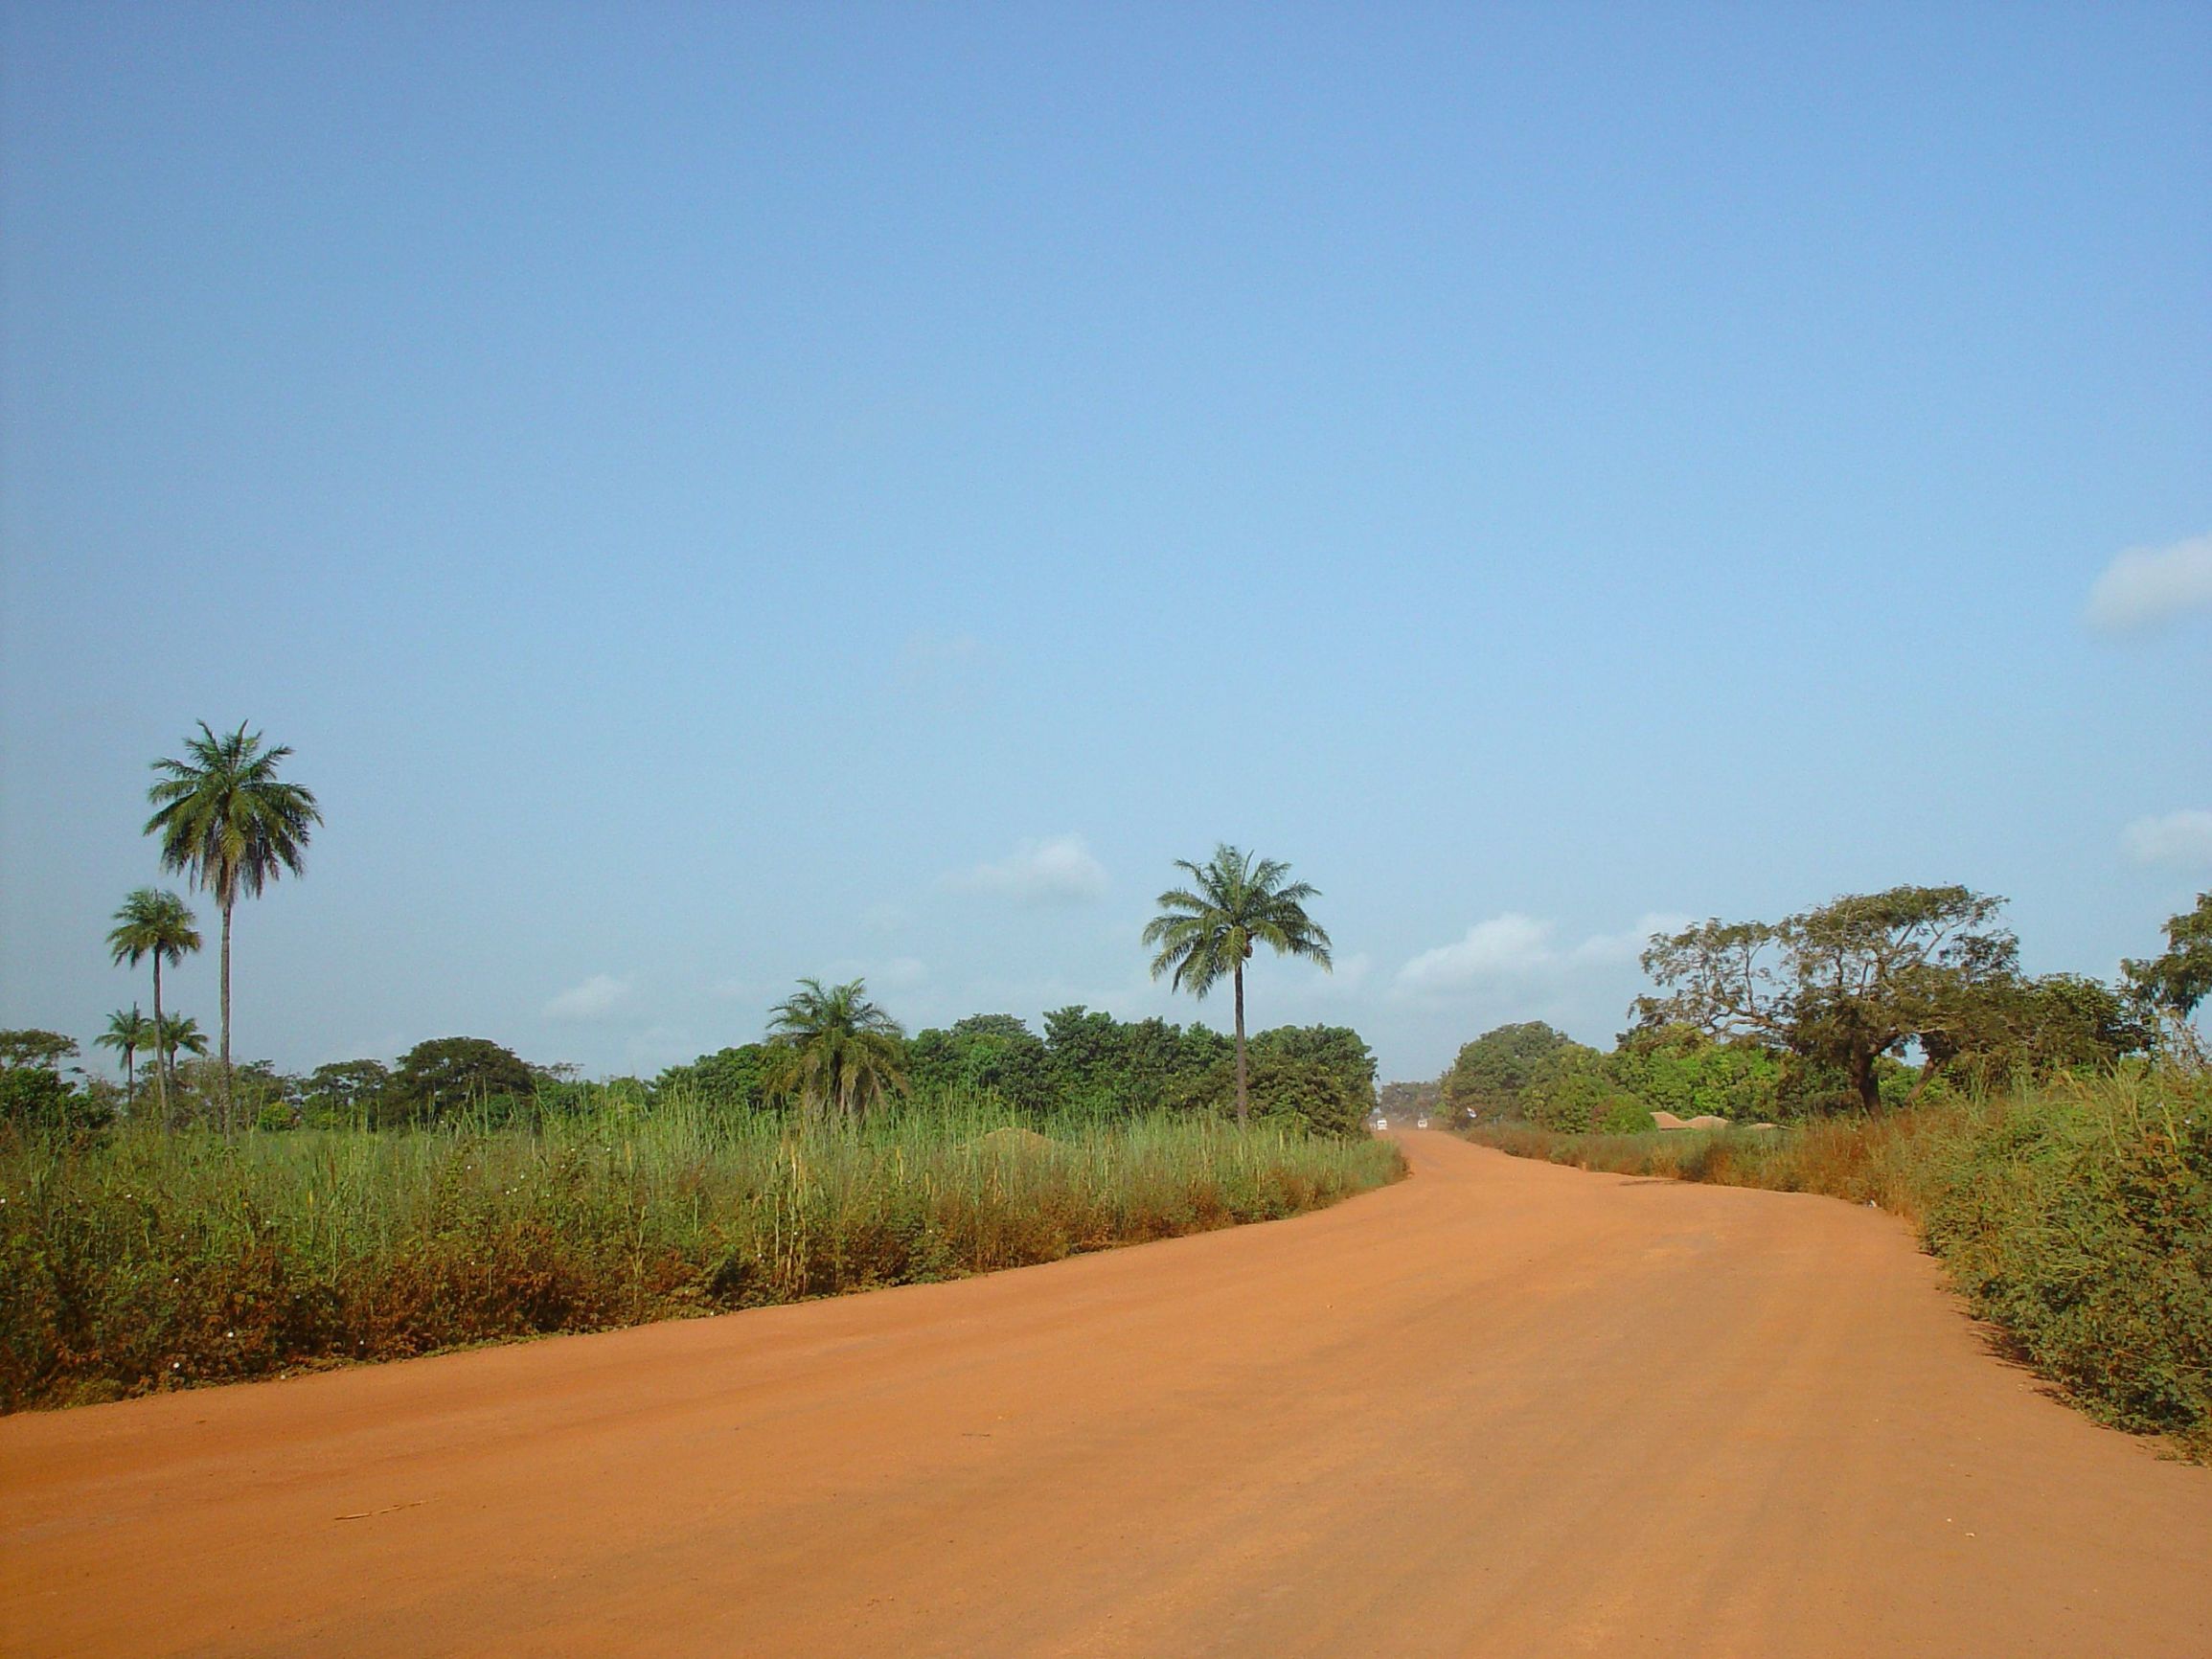 A dirt road in Gambia